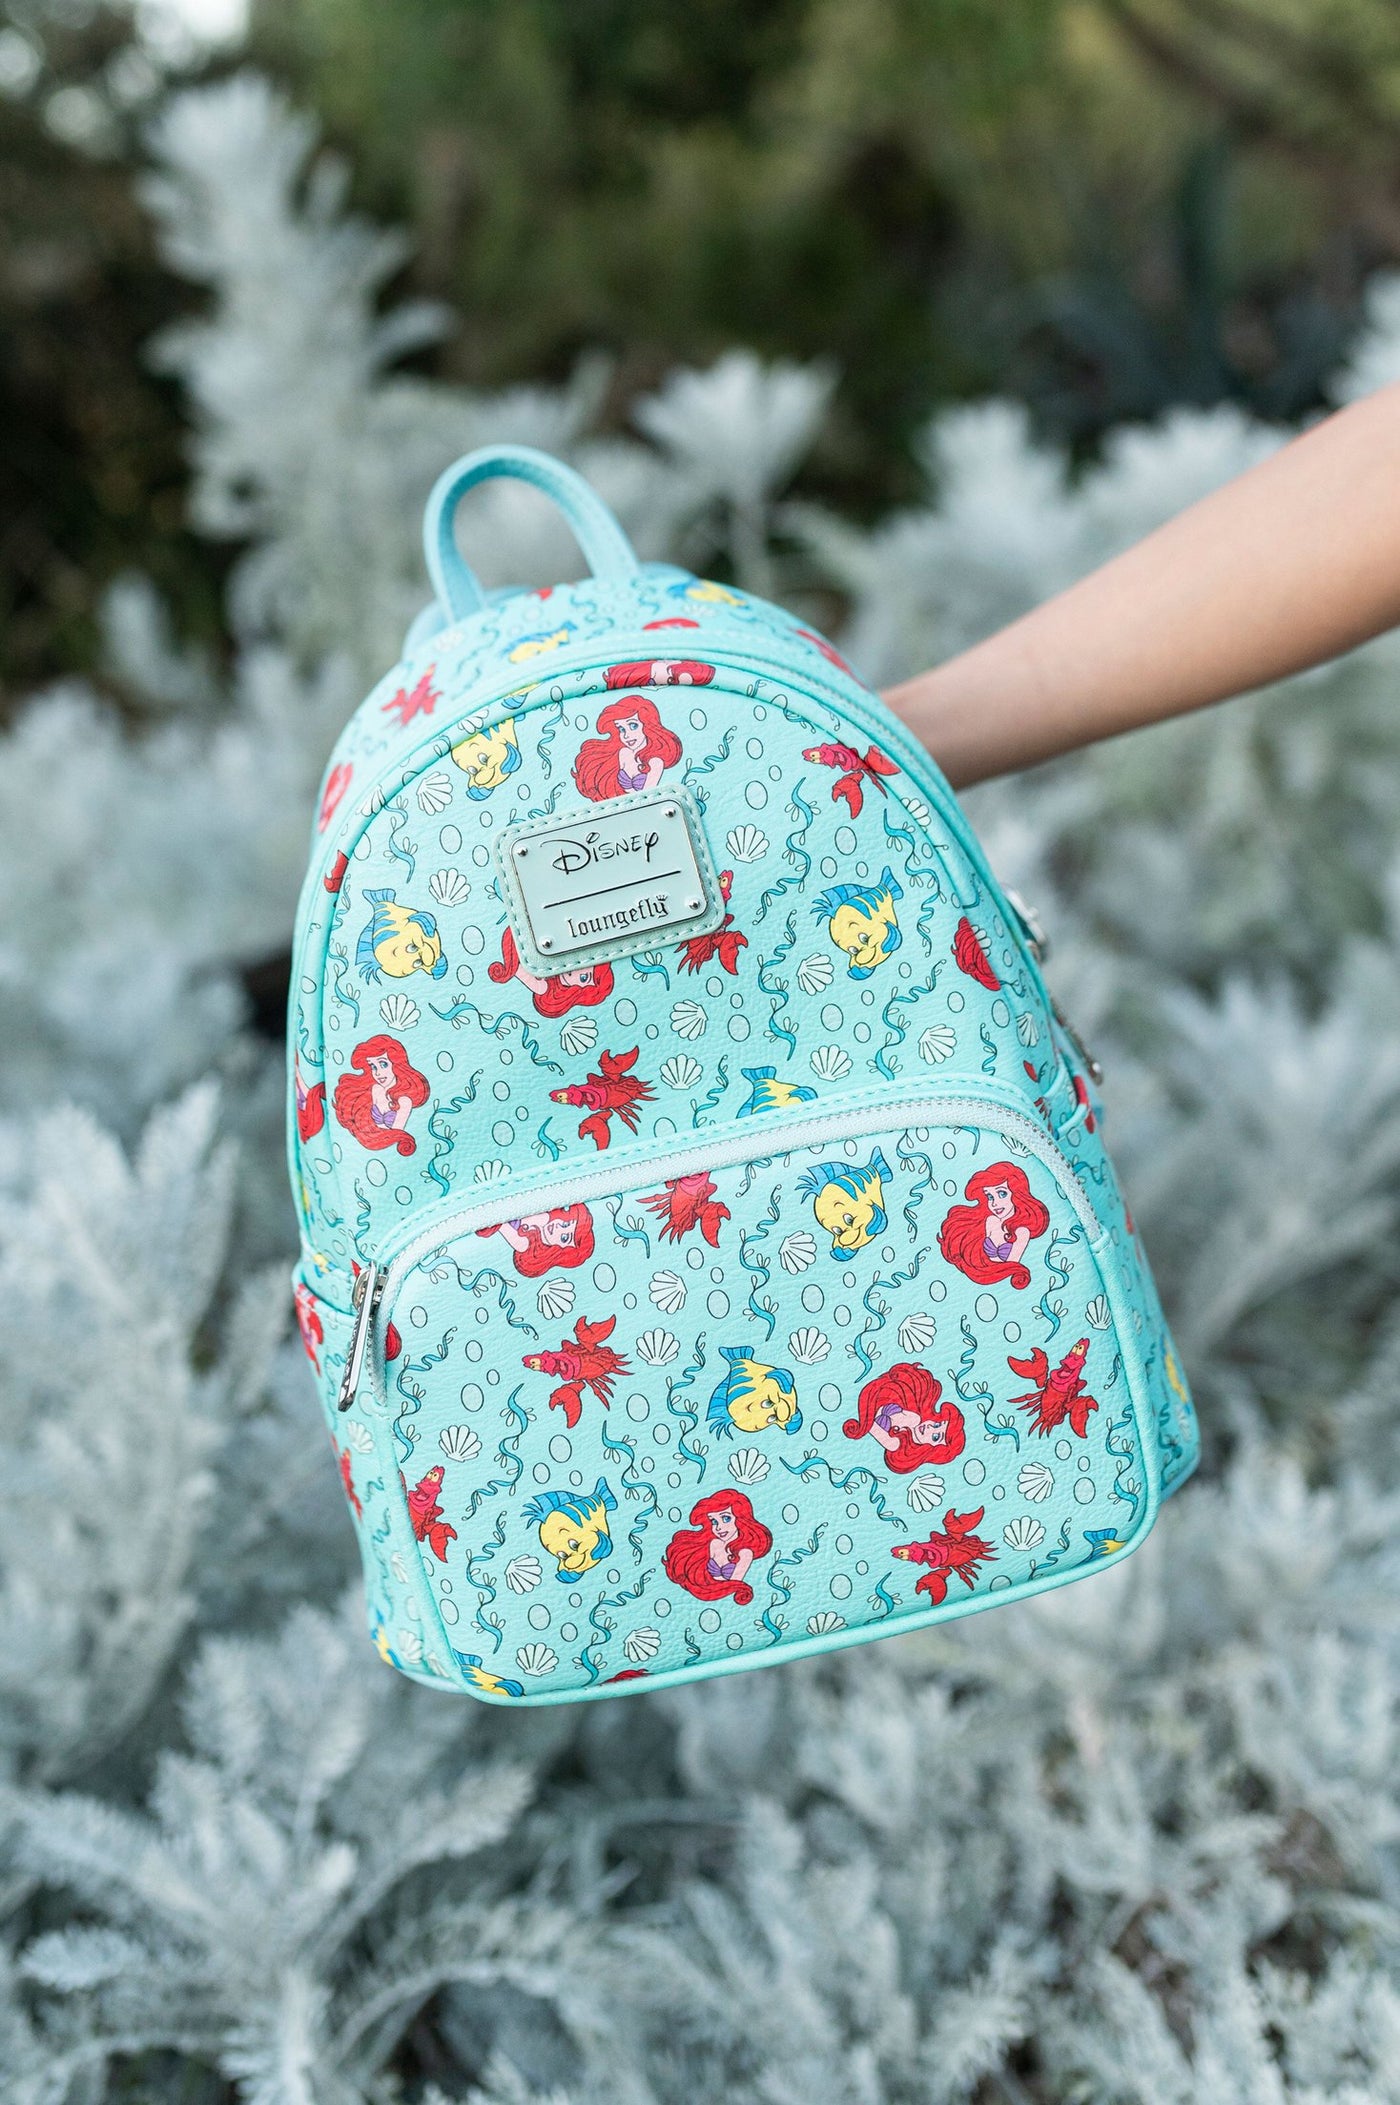 707 Street Exclusive - Loungefly Disney Little Mermaid Ariel and Friends Allover Print Mini Backpack